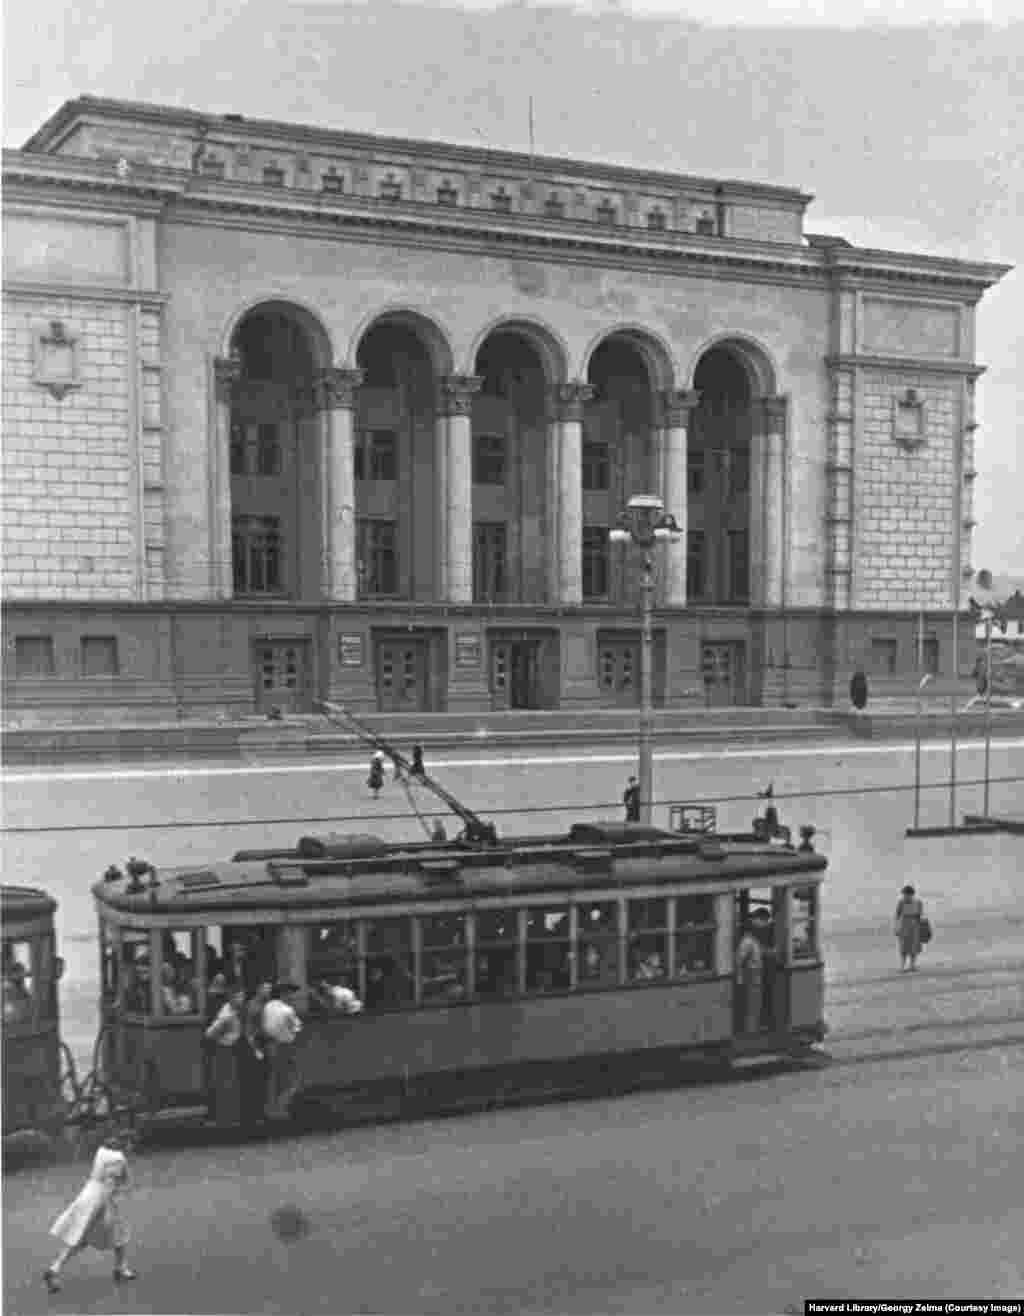 A tram passes the Donetsk Theater, known at the time as the Stalino Drama Theater. The theatre&rsquo;s activities received international attention in 2014 for pressing on with scheduled performances amid Russian-backed unrest that engulfed Donetsk that year.&nbsp;